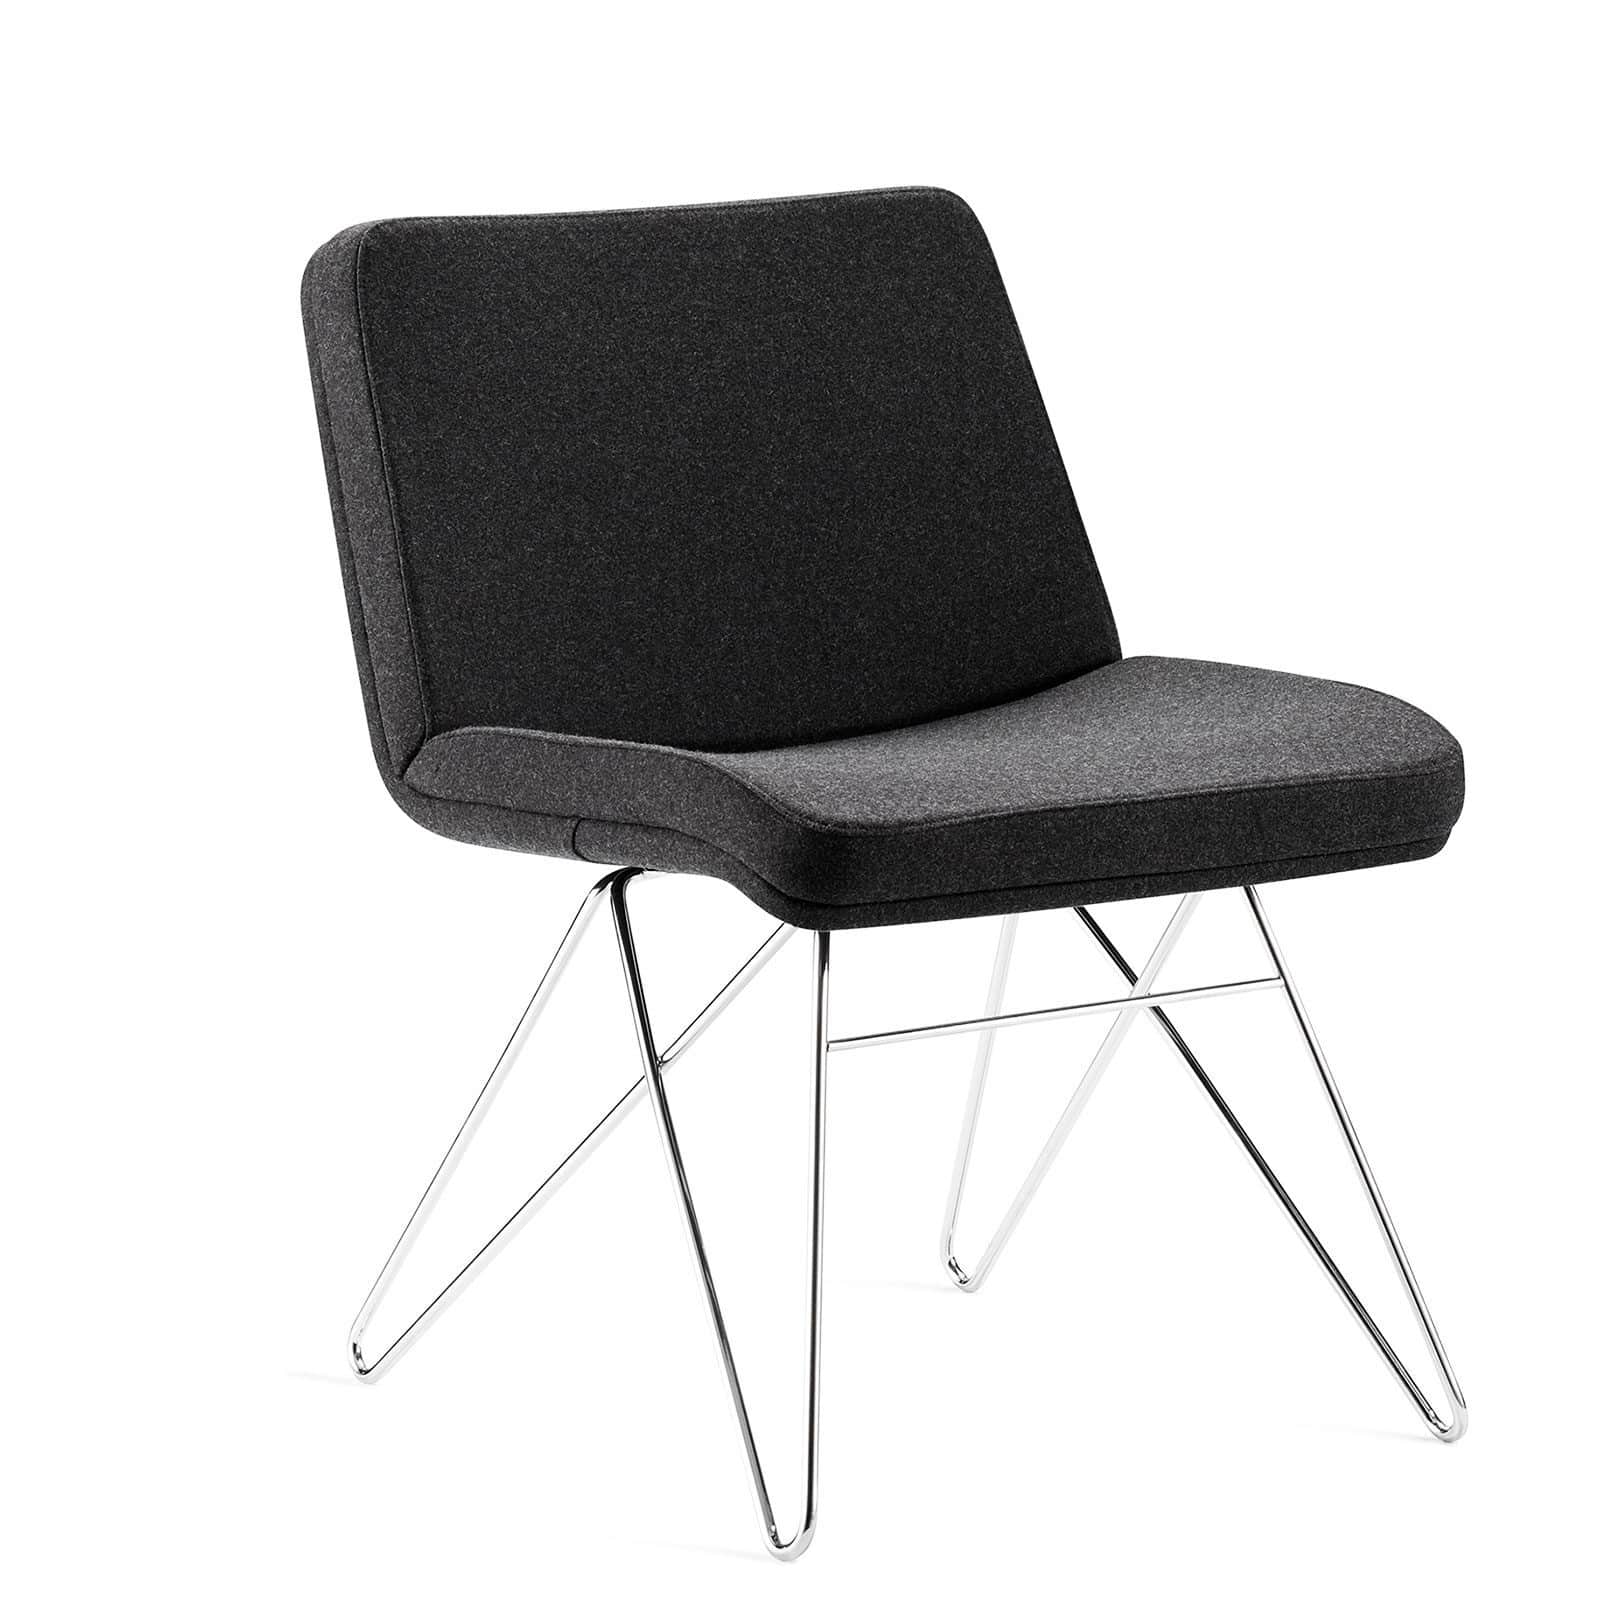 Designed by Joachim Jensen, the complete CrissCross line includes high back, mid back and low back lounge pieces as well as high back and mid back conference chairs.